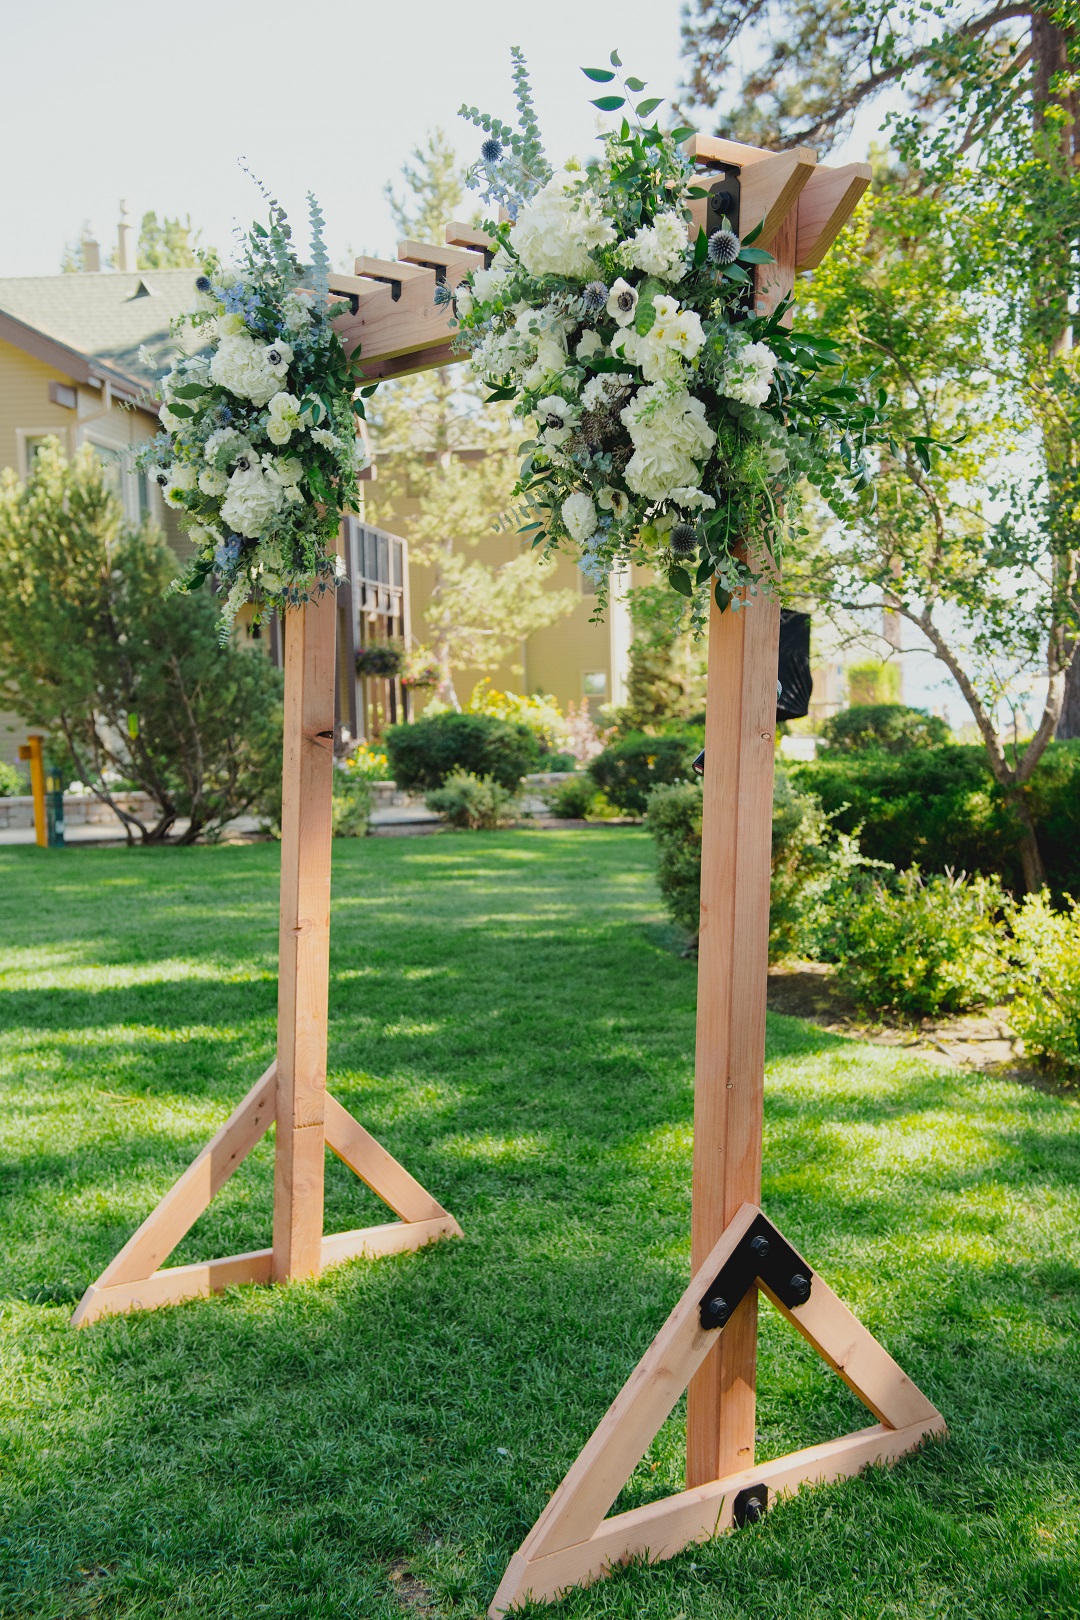 DIY Wedding Arch built with Simpson Strong-Tie Outdoor Accents